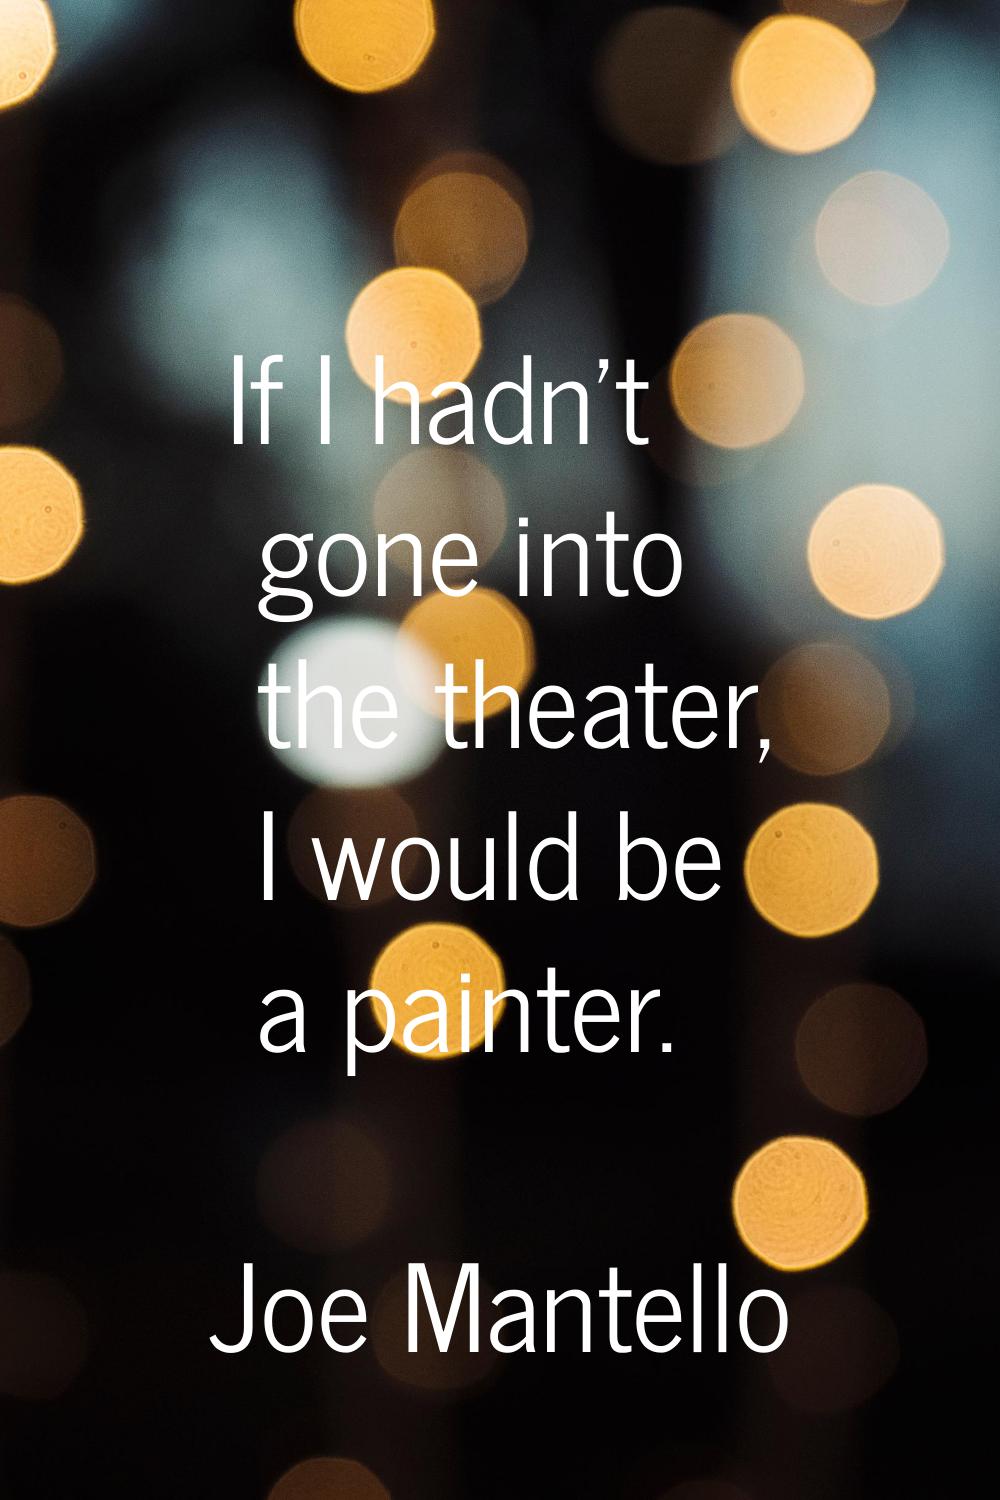 If I hadn't gone into the theater, I would be a painter.